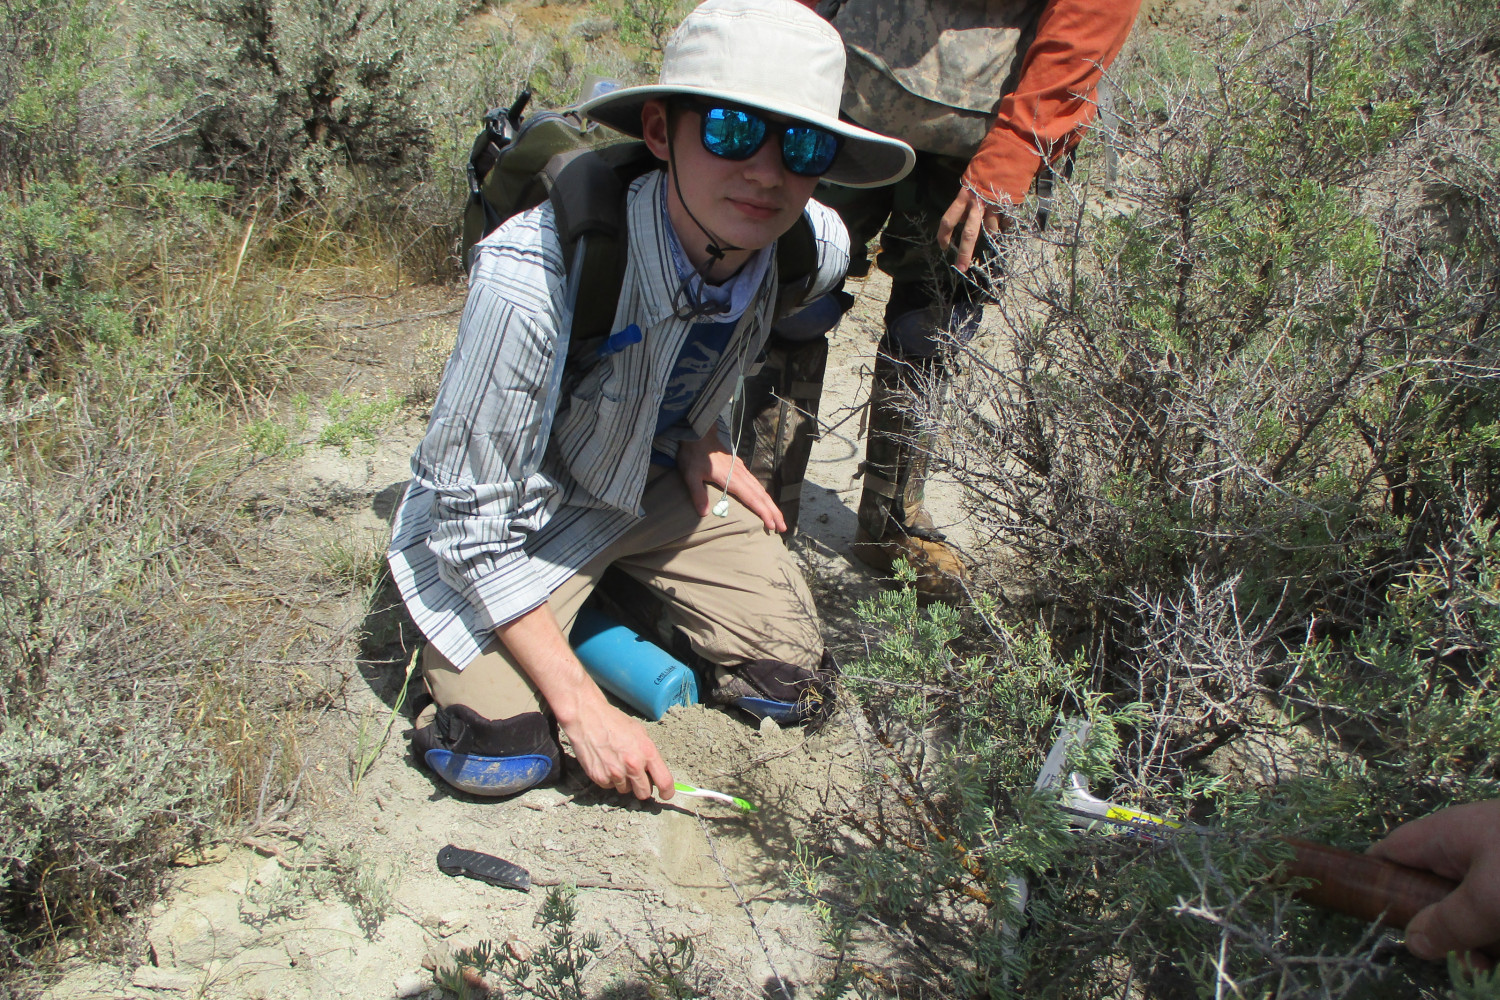 A student uncovering fossils at a dig site.